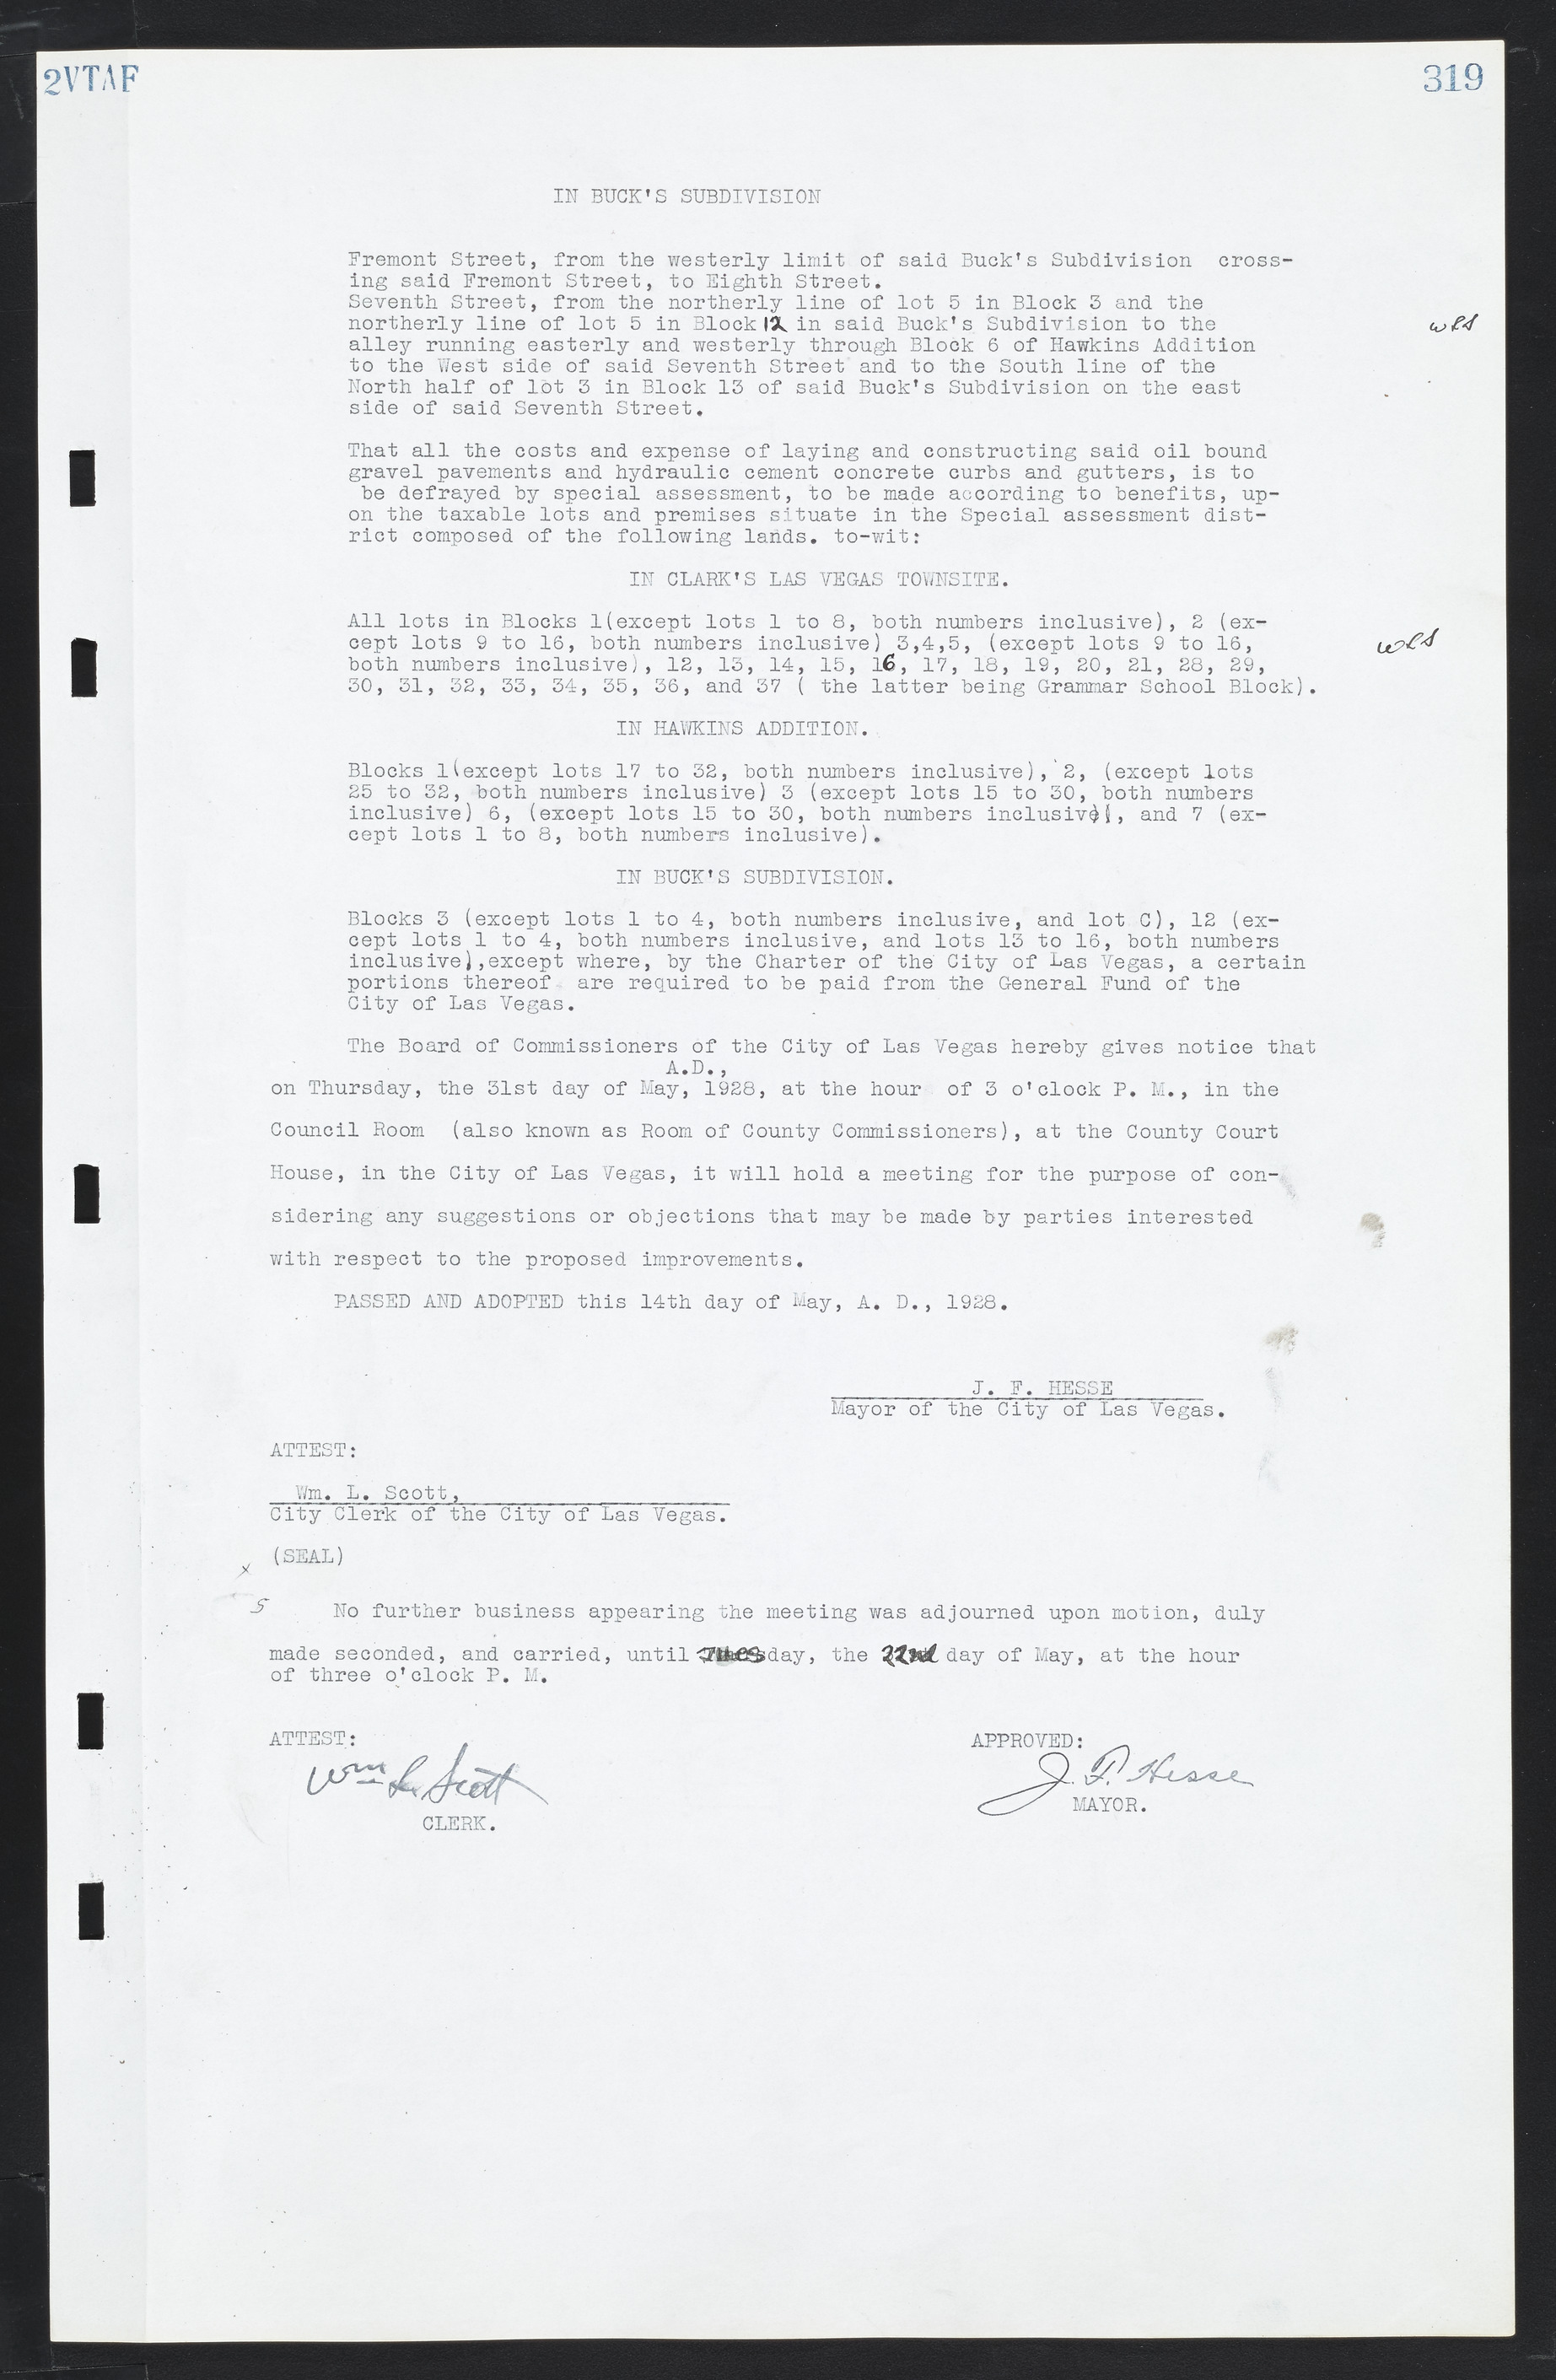 Las Vegas City Commission Minutes, March 1, 1922 to May 10, 1929, lvc000002-328